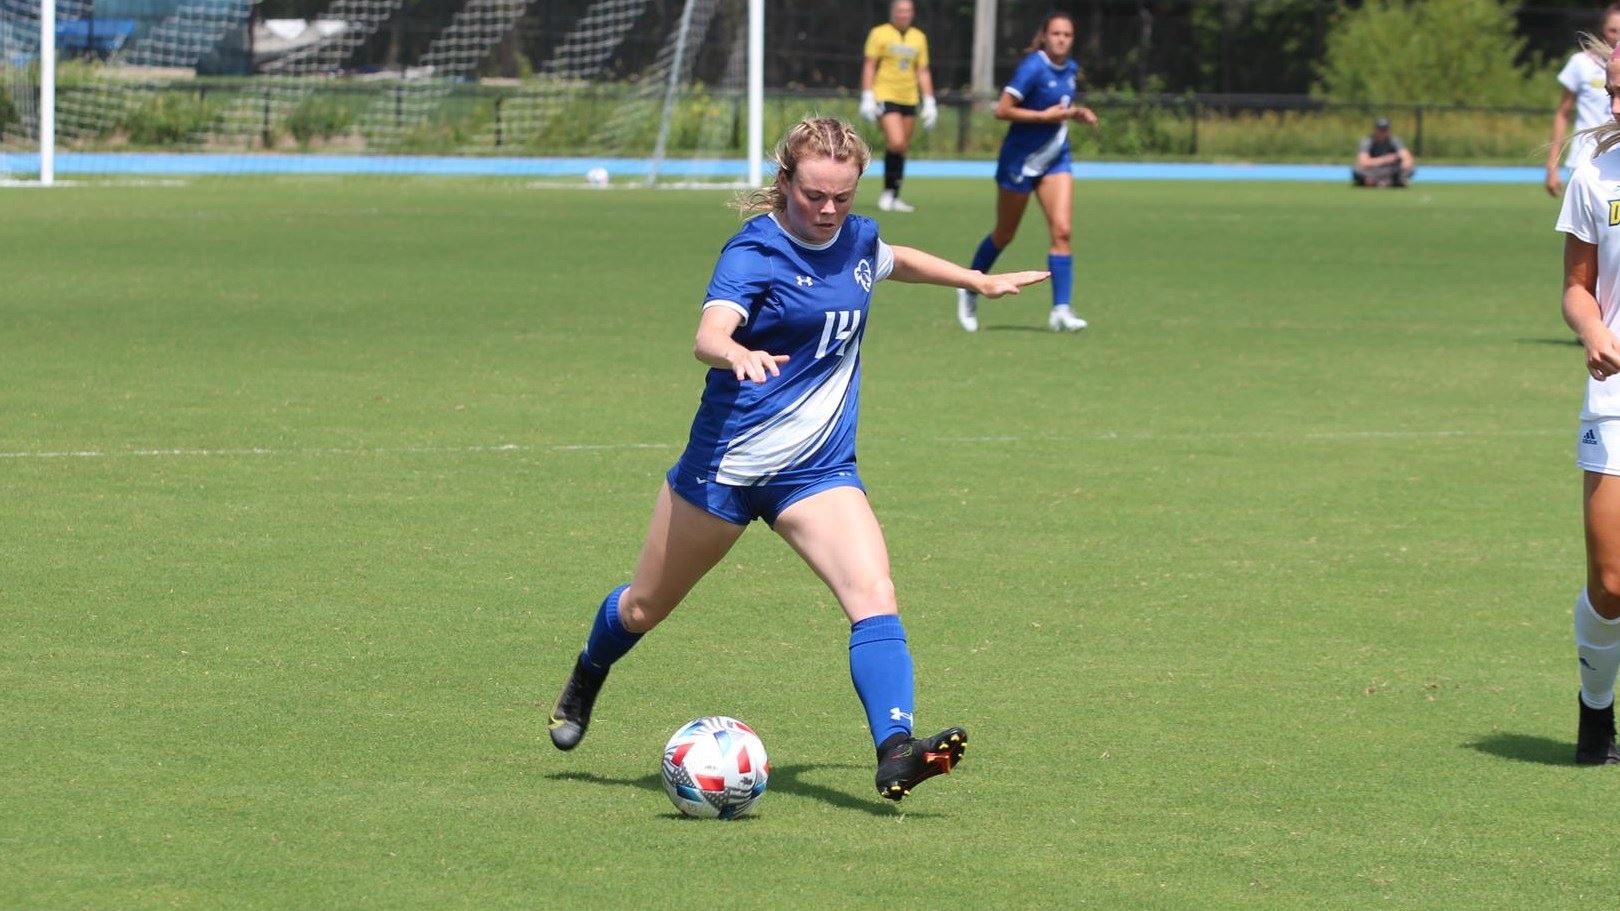 A Seton Hall women's soccer player dribbles and kicks the ball during a game against Drexel.